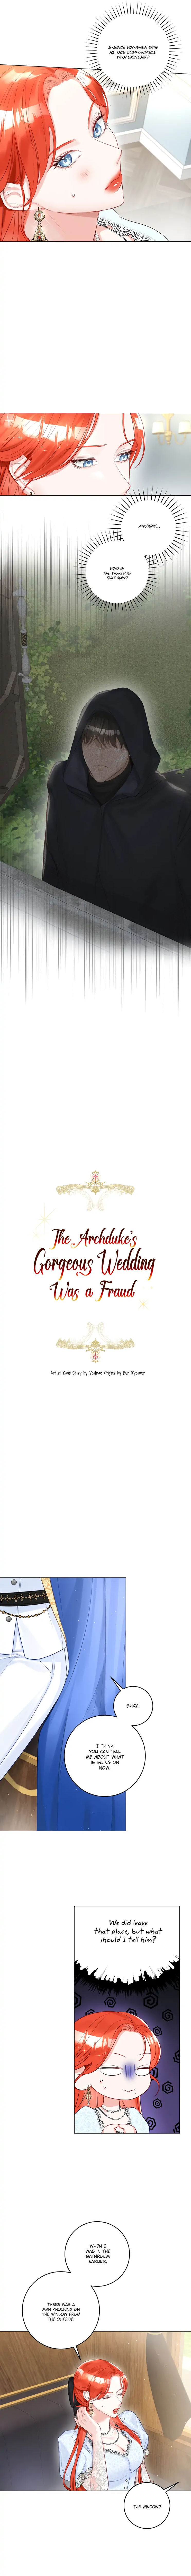 The Archduke’s Gorgeous Wedding Was a Fraud chapter 16